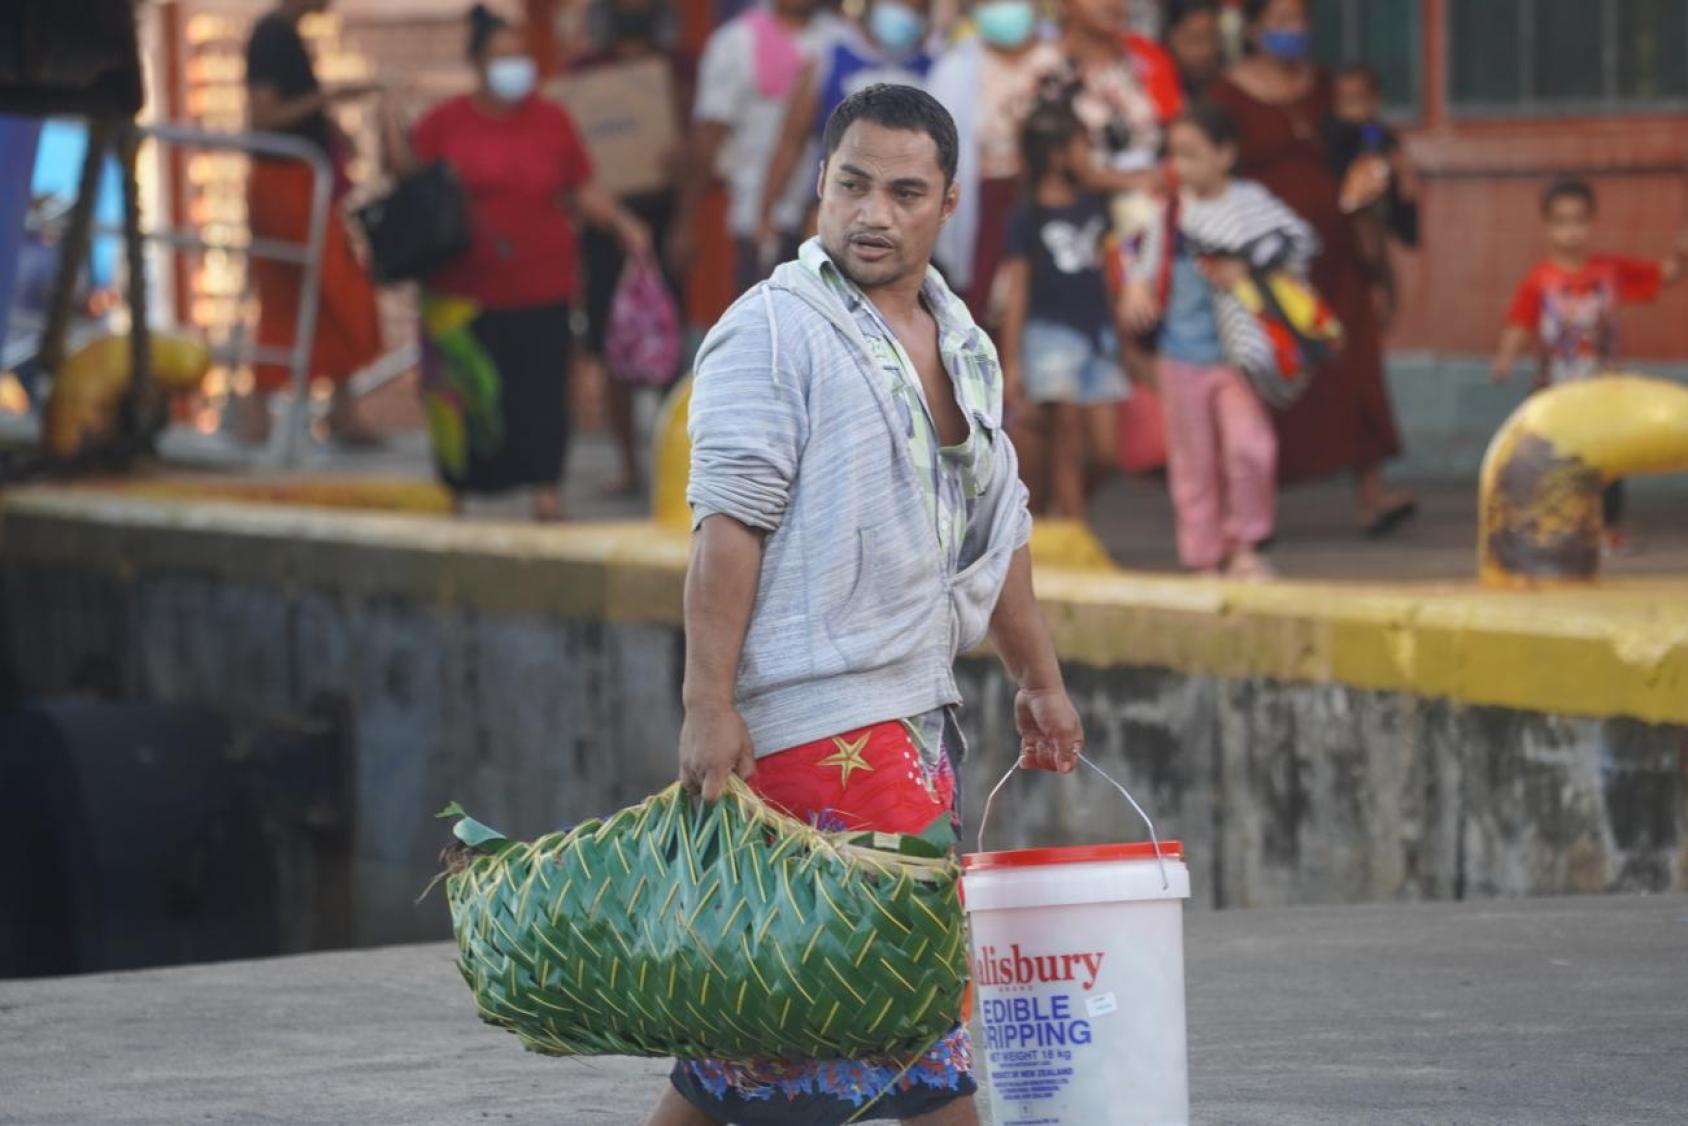 A person is walking in a busy street market carrying a large green leaf-woven basket on their left side and a white plastic bucket with red text on the right